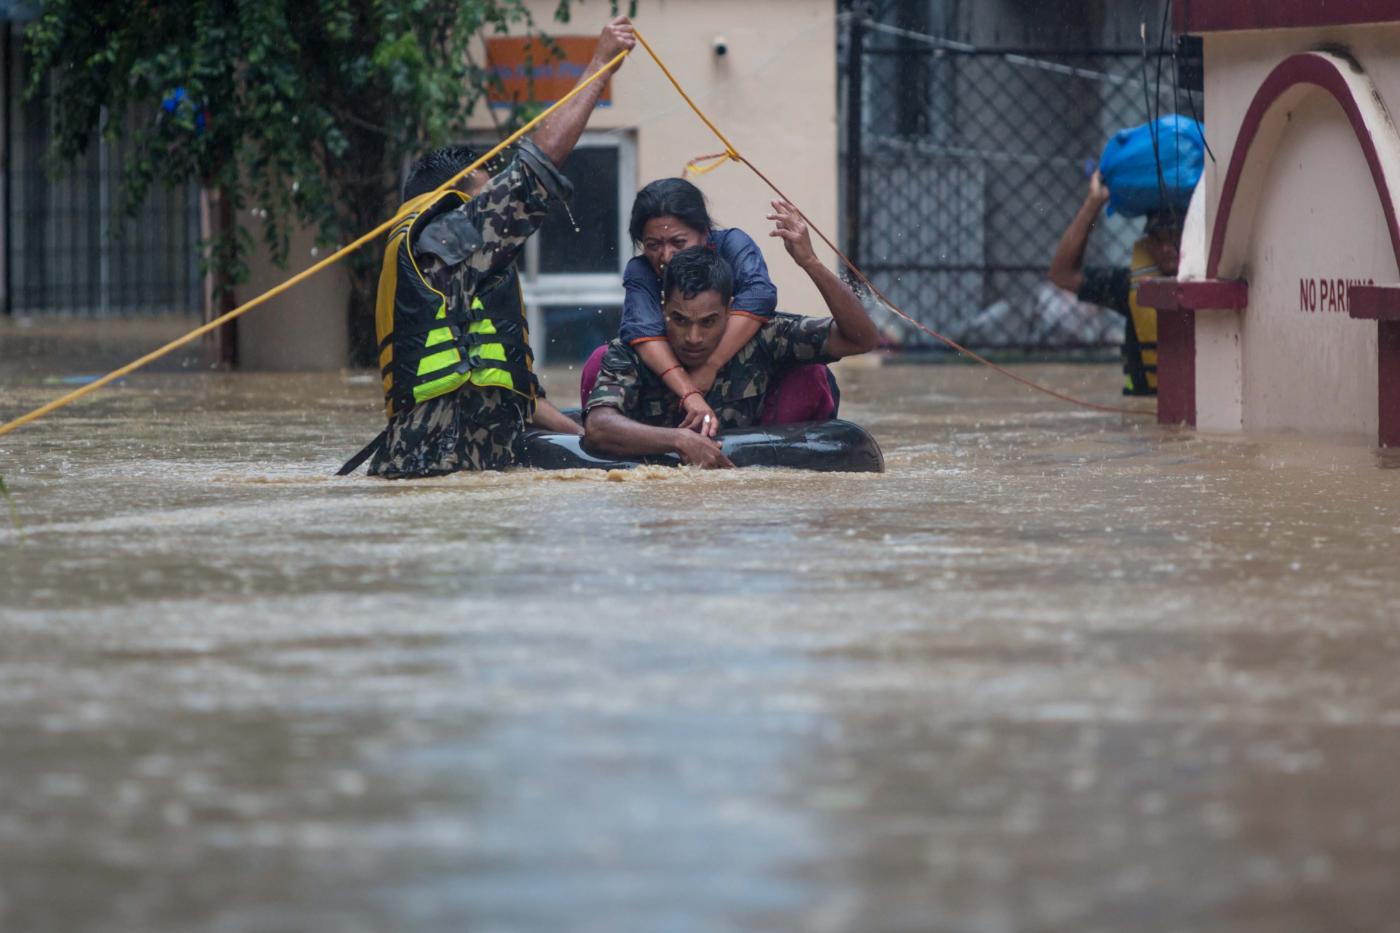 KATHMANDU, July 12, 2019 (Xinhua) -- Nepalese army personnel rescue local people after a heavy rainfall in Kathmandu, Nepal, July 12, 2019. Nepal was hit by heavy rainfall that caused floods and landslides in many places. (Xinhua/Sulav Shrestha/IANS) by sulav shrestha. 